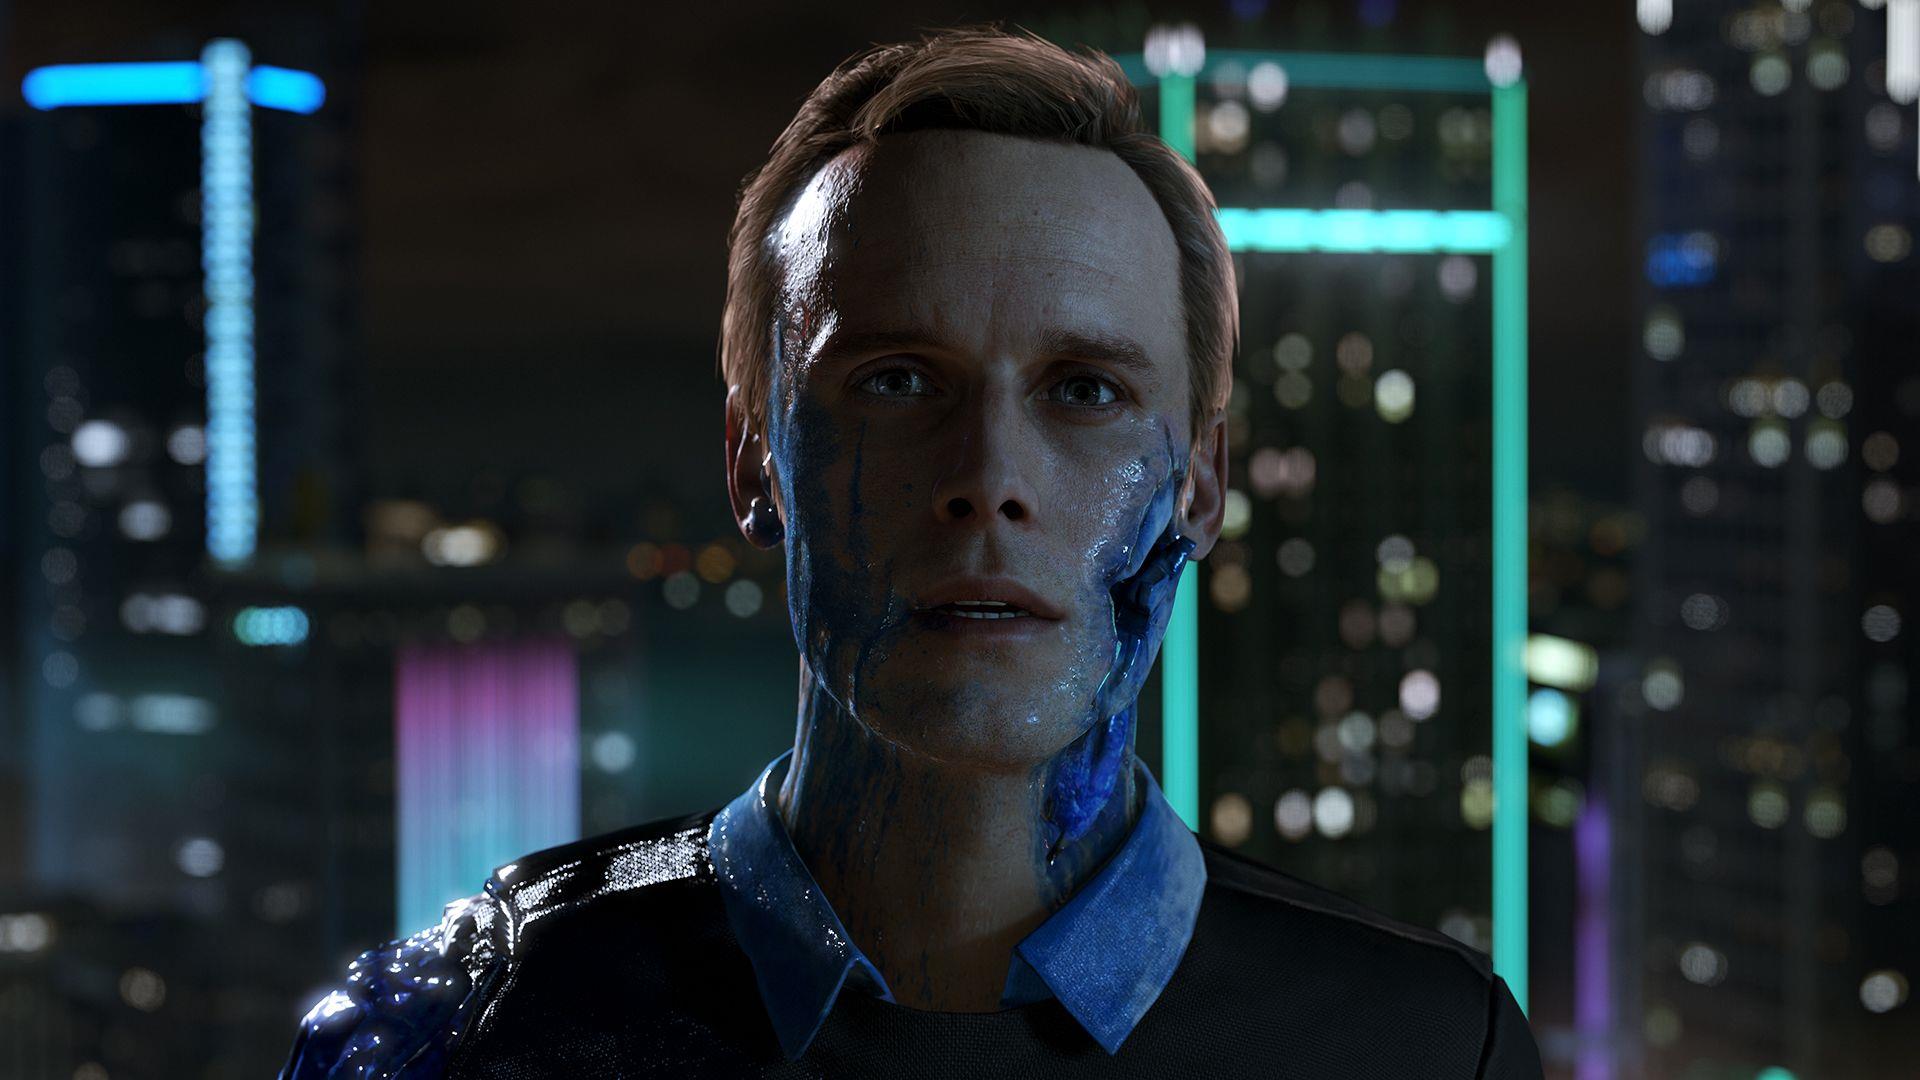 Image for Quantic Dream denies reports of inappropriate behavior and toxic working culture at studio